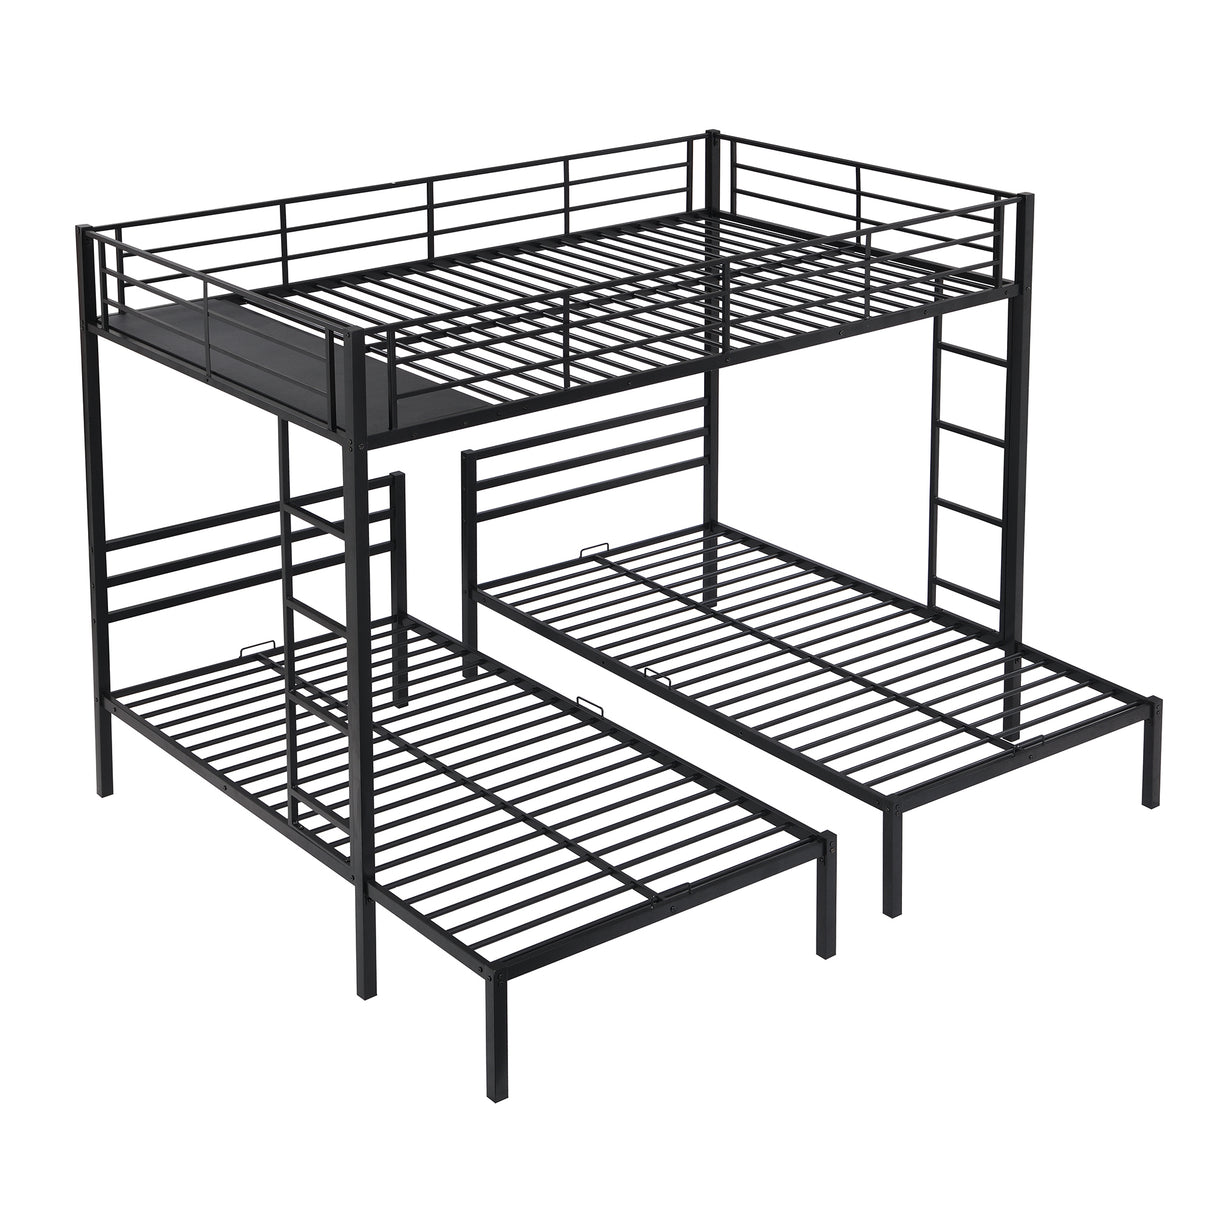 Full over Twin&Twin Size Bunk Bed with Built-in Shelf, Black - Home Elegance USA